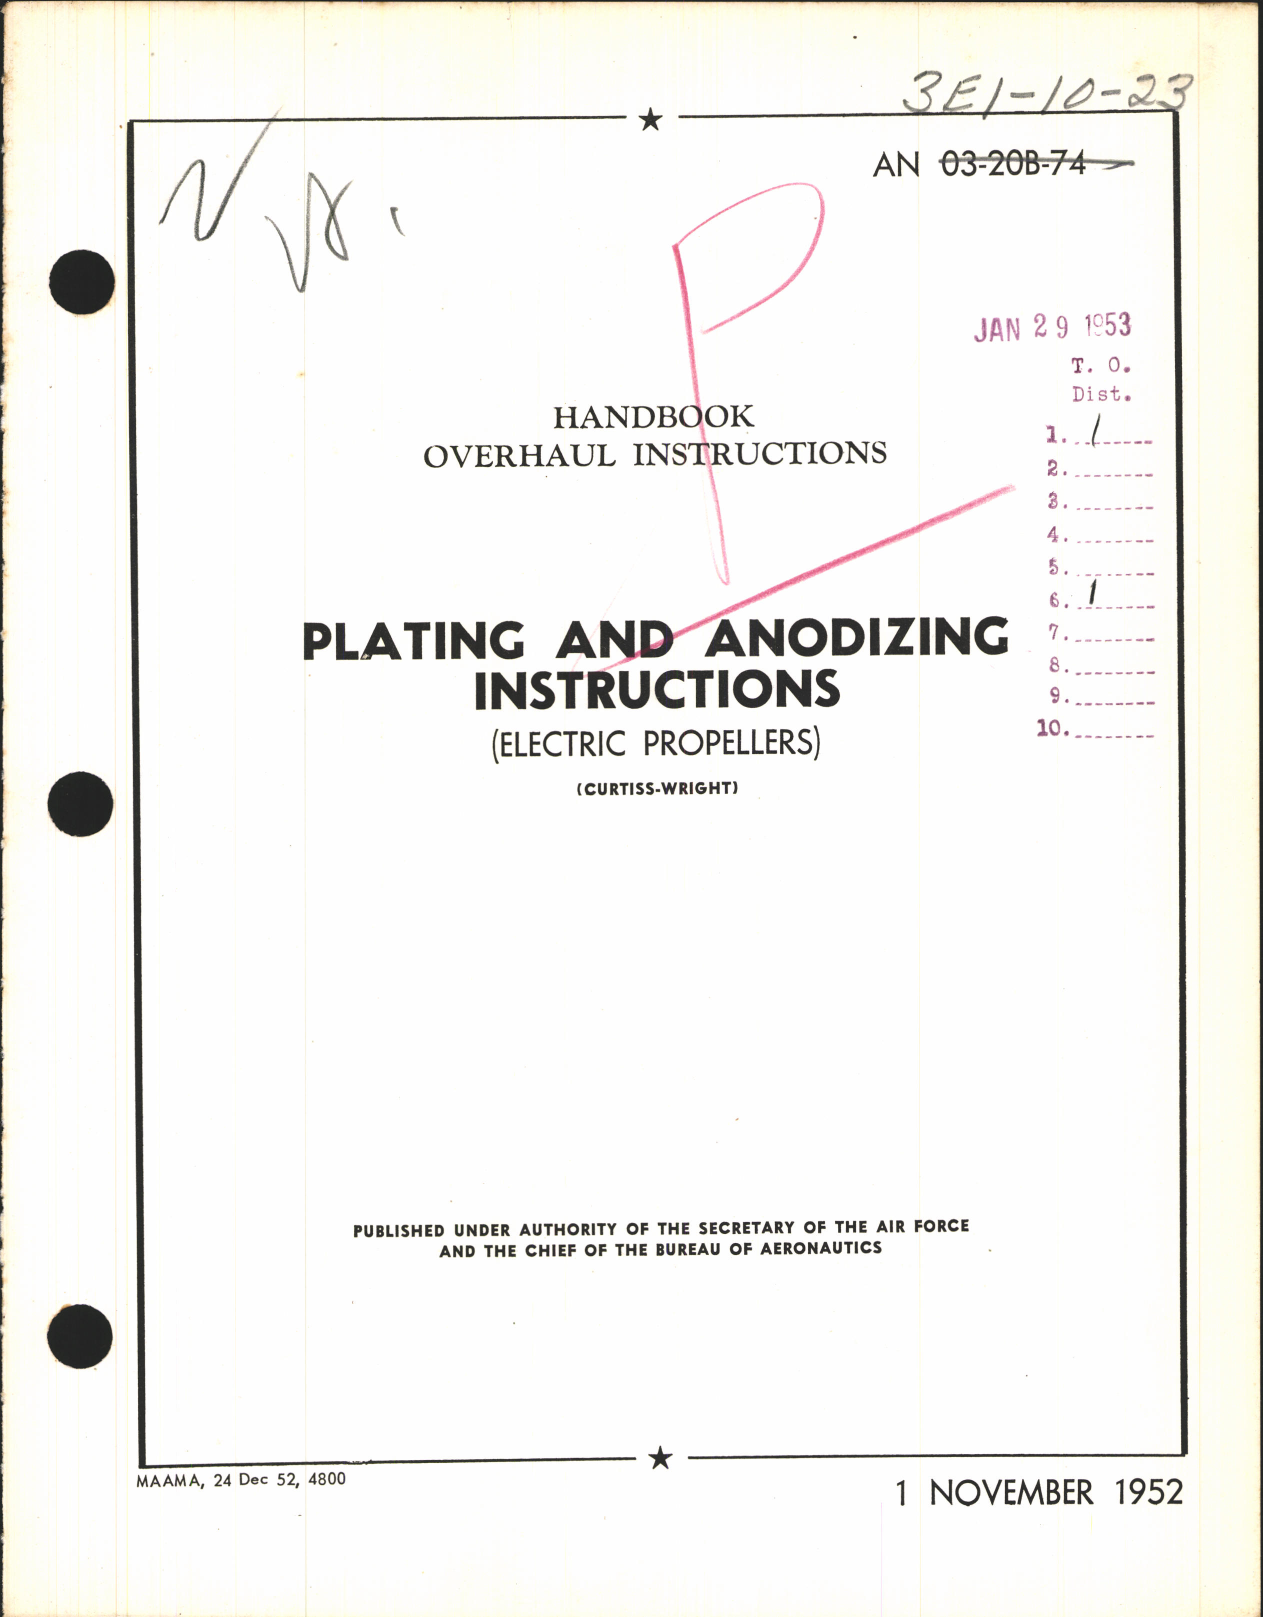 Sample page 1 from AirCorps Library document: Overhaul Instructions Plating and Anodizing Instructions for Electric Propellers